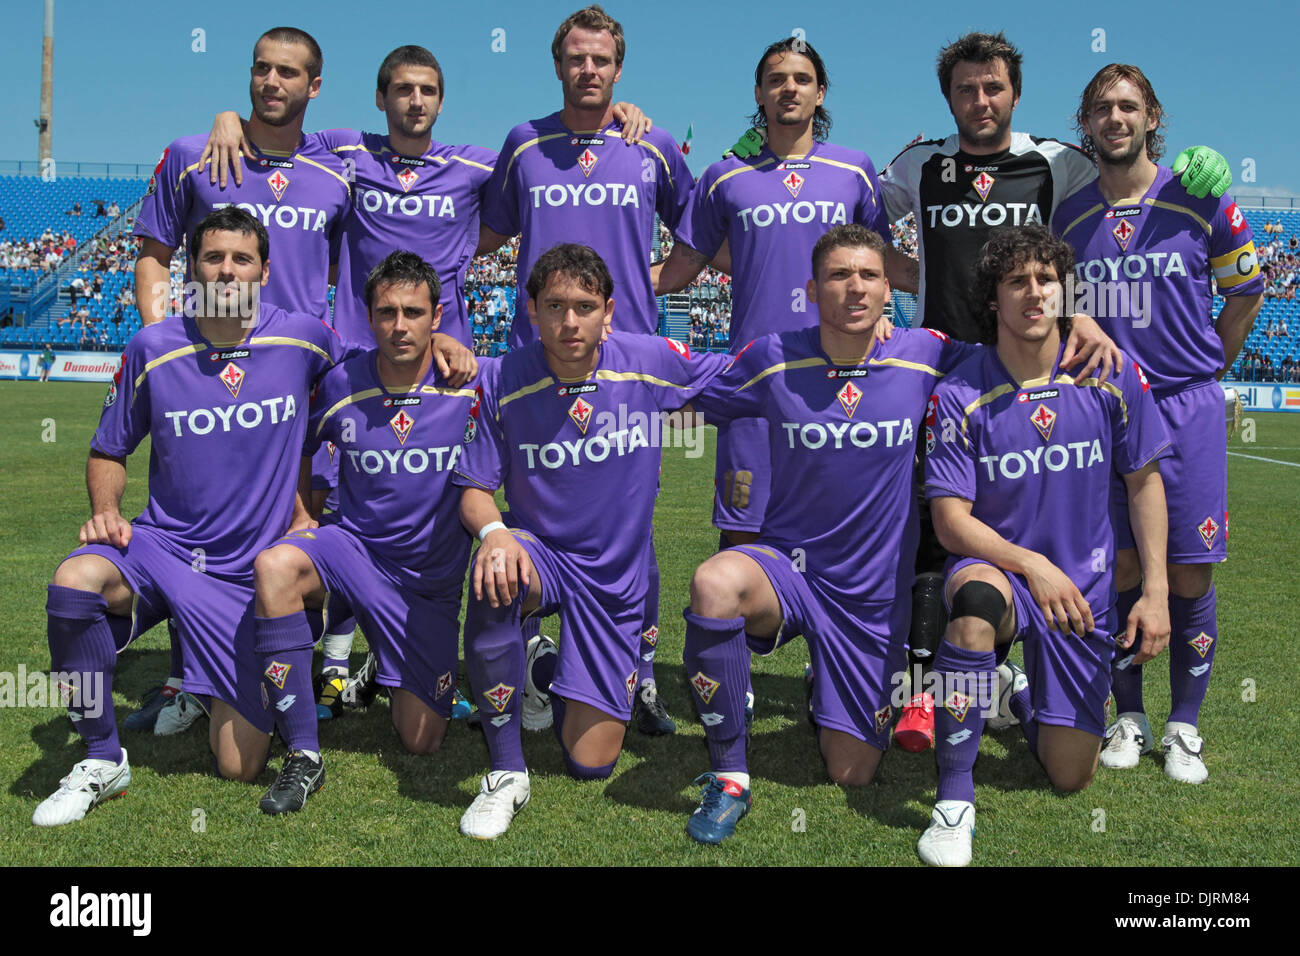 May 23, 2010 - Montreal, Quebec, Canada - 23 May 2010: Fiorentina's  starting 11 at the FIFA game between AFC Fiorentina and the Montreal Imapct  played at Saputo Stadium in Montreal, Canada.